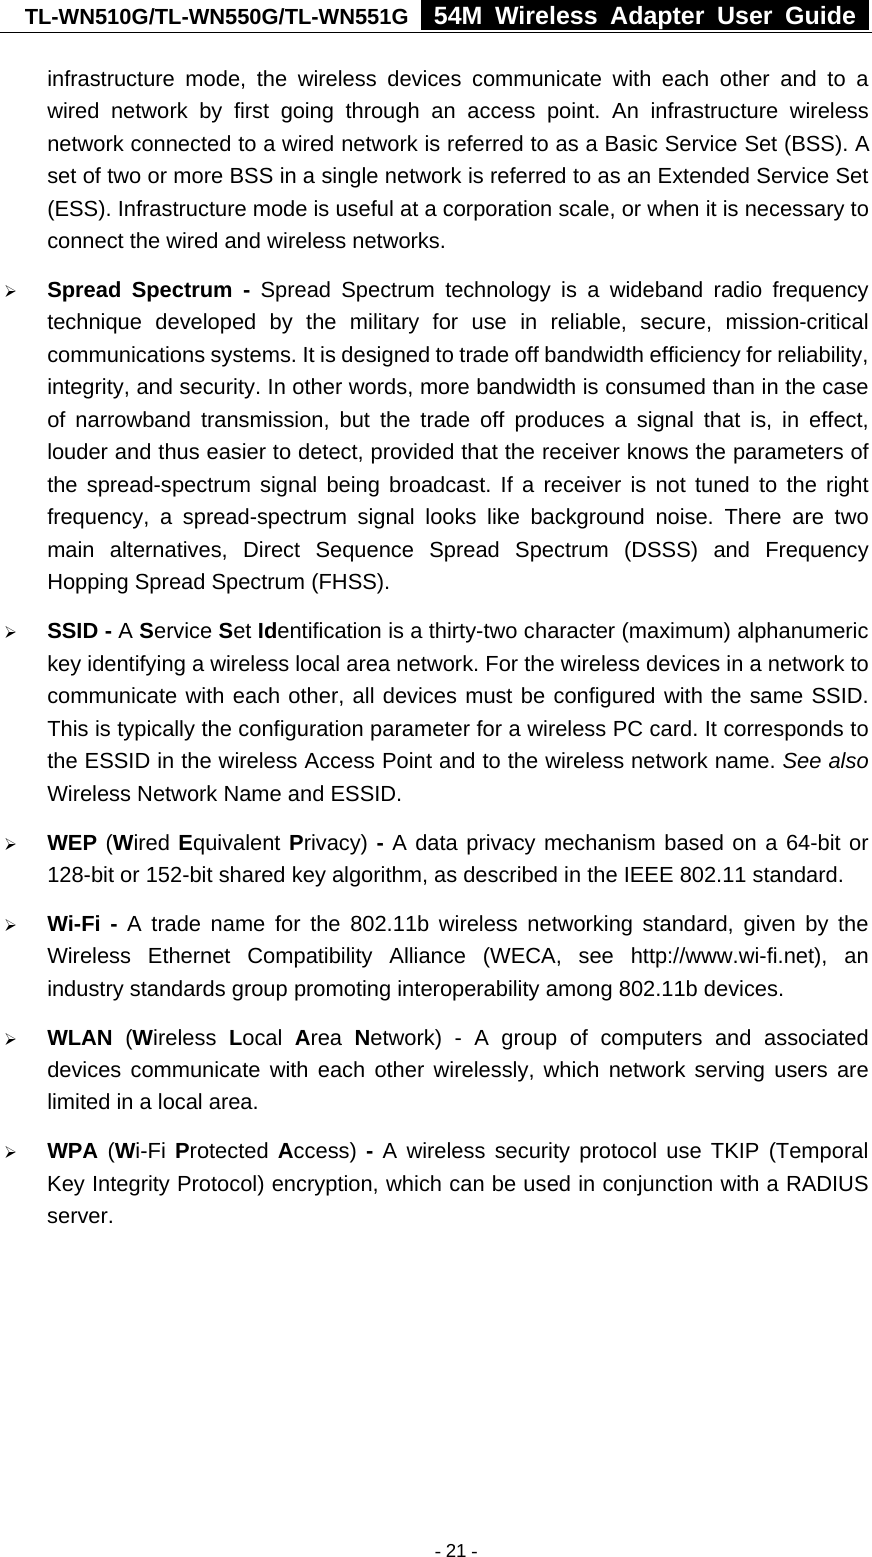 TL-WN510G/TL-WN550G/TL-WN551G  54M Wireless Adapter User Guide  infrastructure mode, the wireless devices communicate with each other and to a wired network by first going through an access point. An infrastructure wireless network connected to a wired network is referred to as a Basic Service Set (BSS). A set of two or more BSS in a single network is referred to as an Extended Service Set (ESS). Infrastructure mode is useful at a corporation scale, or when it is necessary to connect the wired and wireless networks.   ¾ Spread Spectrum - Spread Spectrum technology is a wideband radio frequency technique developed by the military for use in reliable, secure, mission-critical communications systems. It is designed to trade off bandwidth efficiency for reliability, integrity, and security. In other words, more bandwidth is consumed than in the case of narrowband transmission, but the trade off produces a signal that is, in effect, louder and thus easier to detect, provided that the receiver knows the parameters of the spread-spectrum signal being broadcast. If a receiver is not tuned to the right frequency, a spread-spectrum signal looks like background noise. There are two main alternatives, Direct Sequence Spread Spectrum (DSSS) and Frequency Hopping Spread Spectrum (FHSS). ¾ SSID - A Service Set Identification is a thirty-two character (maximum) alphanumeric key identifying a wireless local area network. For the wireless devices in a network to communicate with each other, all devices must be configured with the same SSID. This is typically the configuration parameter for a wireless PC card. It corresponds to the ESSID in the wireless Access Point and to the wireless network name. See also Wireless Network Name and ESSID. ¾ WEP (Wired Equivalent Privacy) - A data privacy mechanism based on a 64-bit or 128-bit or 152-bit shared key algorithm, as described in the IEEE 802.11 standard.   ¾ Wi-Fi - A trade name for the 802.11b wireless networking standard, given by the Wireless Ethernet Compatibility Alliance (WECA, see http://www.wi-fi.net), an industry standards group promoting interoperability among 802.11b devices. ¾ WLAN (Wireless  Local  Area  Network) - A group of computers and associated devices communicate with each other wirelessly, which network serving users are limited in a local area. ¾ WPA (Wi-Fi Protected  Access) - A wireless security protocol use TKIP (Temporal Key Integrity Protocol) encryption, which can be used in conjunction with a RADIUS server.   - 21 -